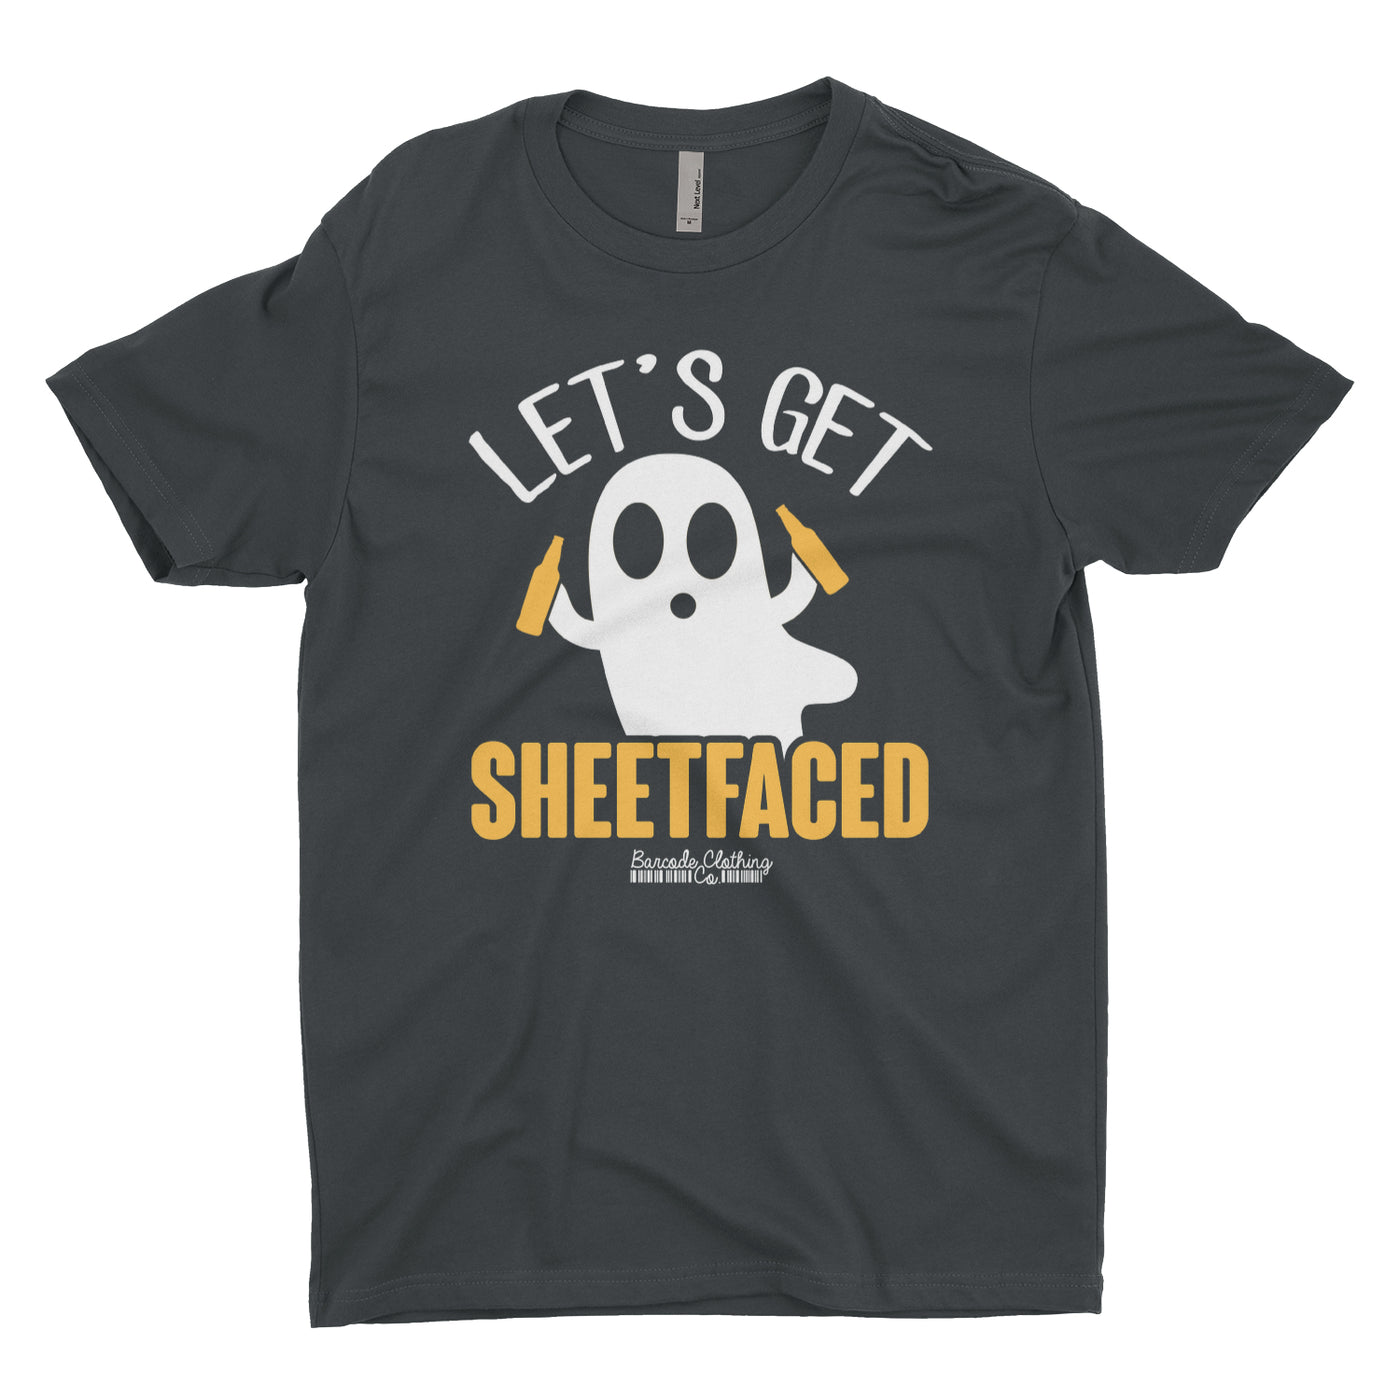 Let's Get Sheetfaced